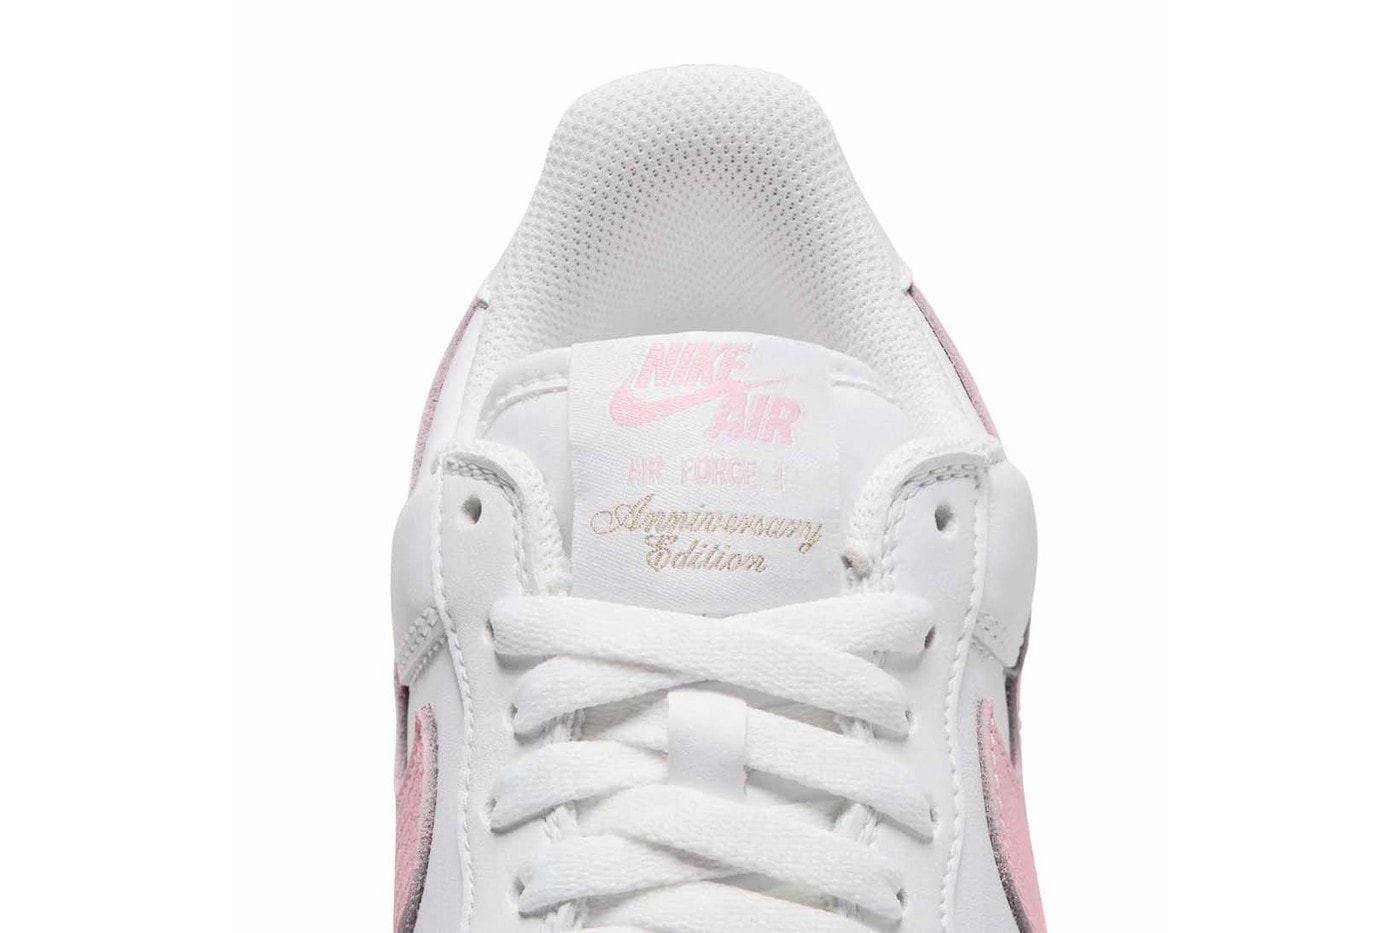 nike air force 1 low since 82 white pink price release